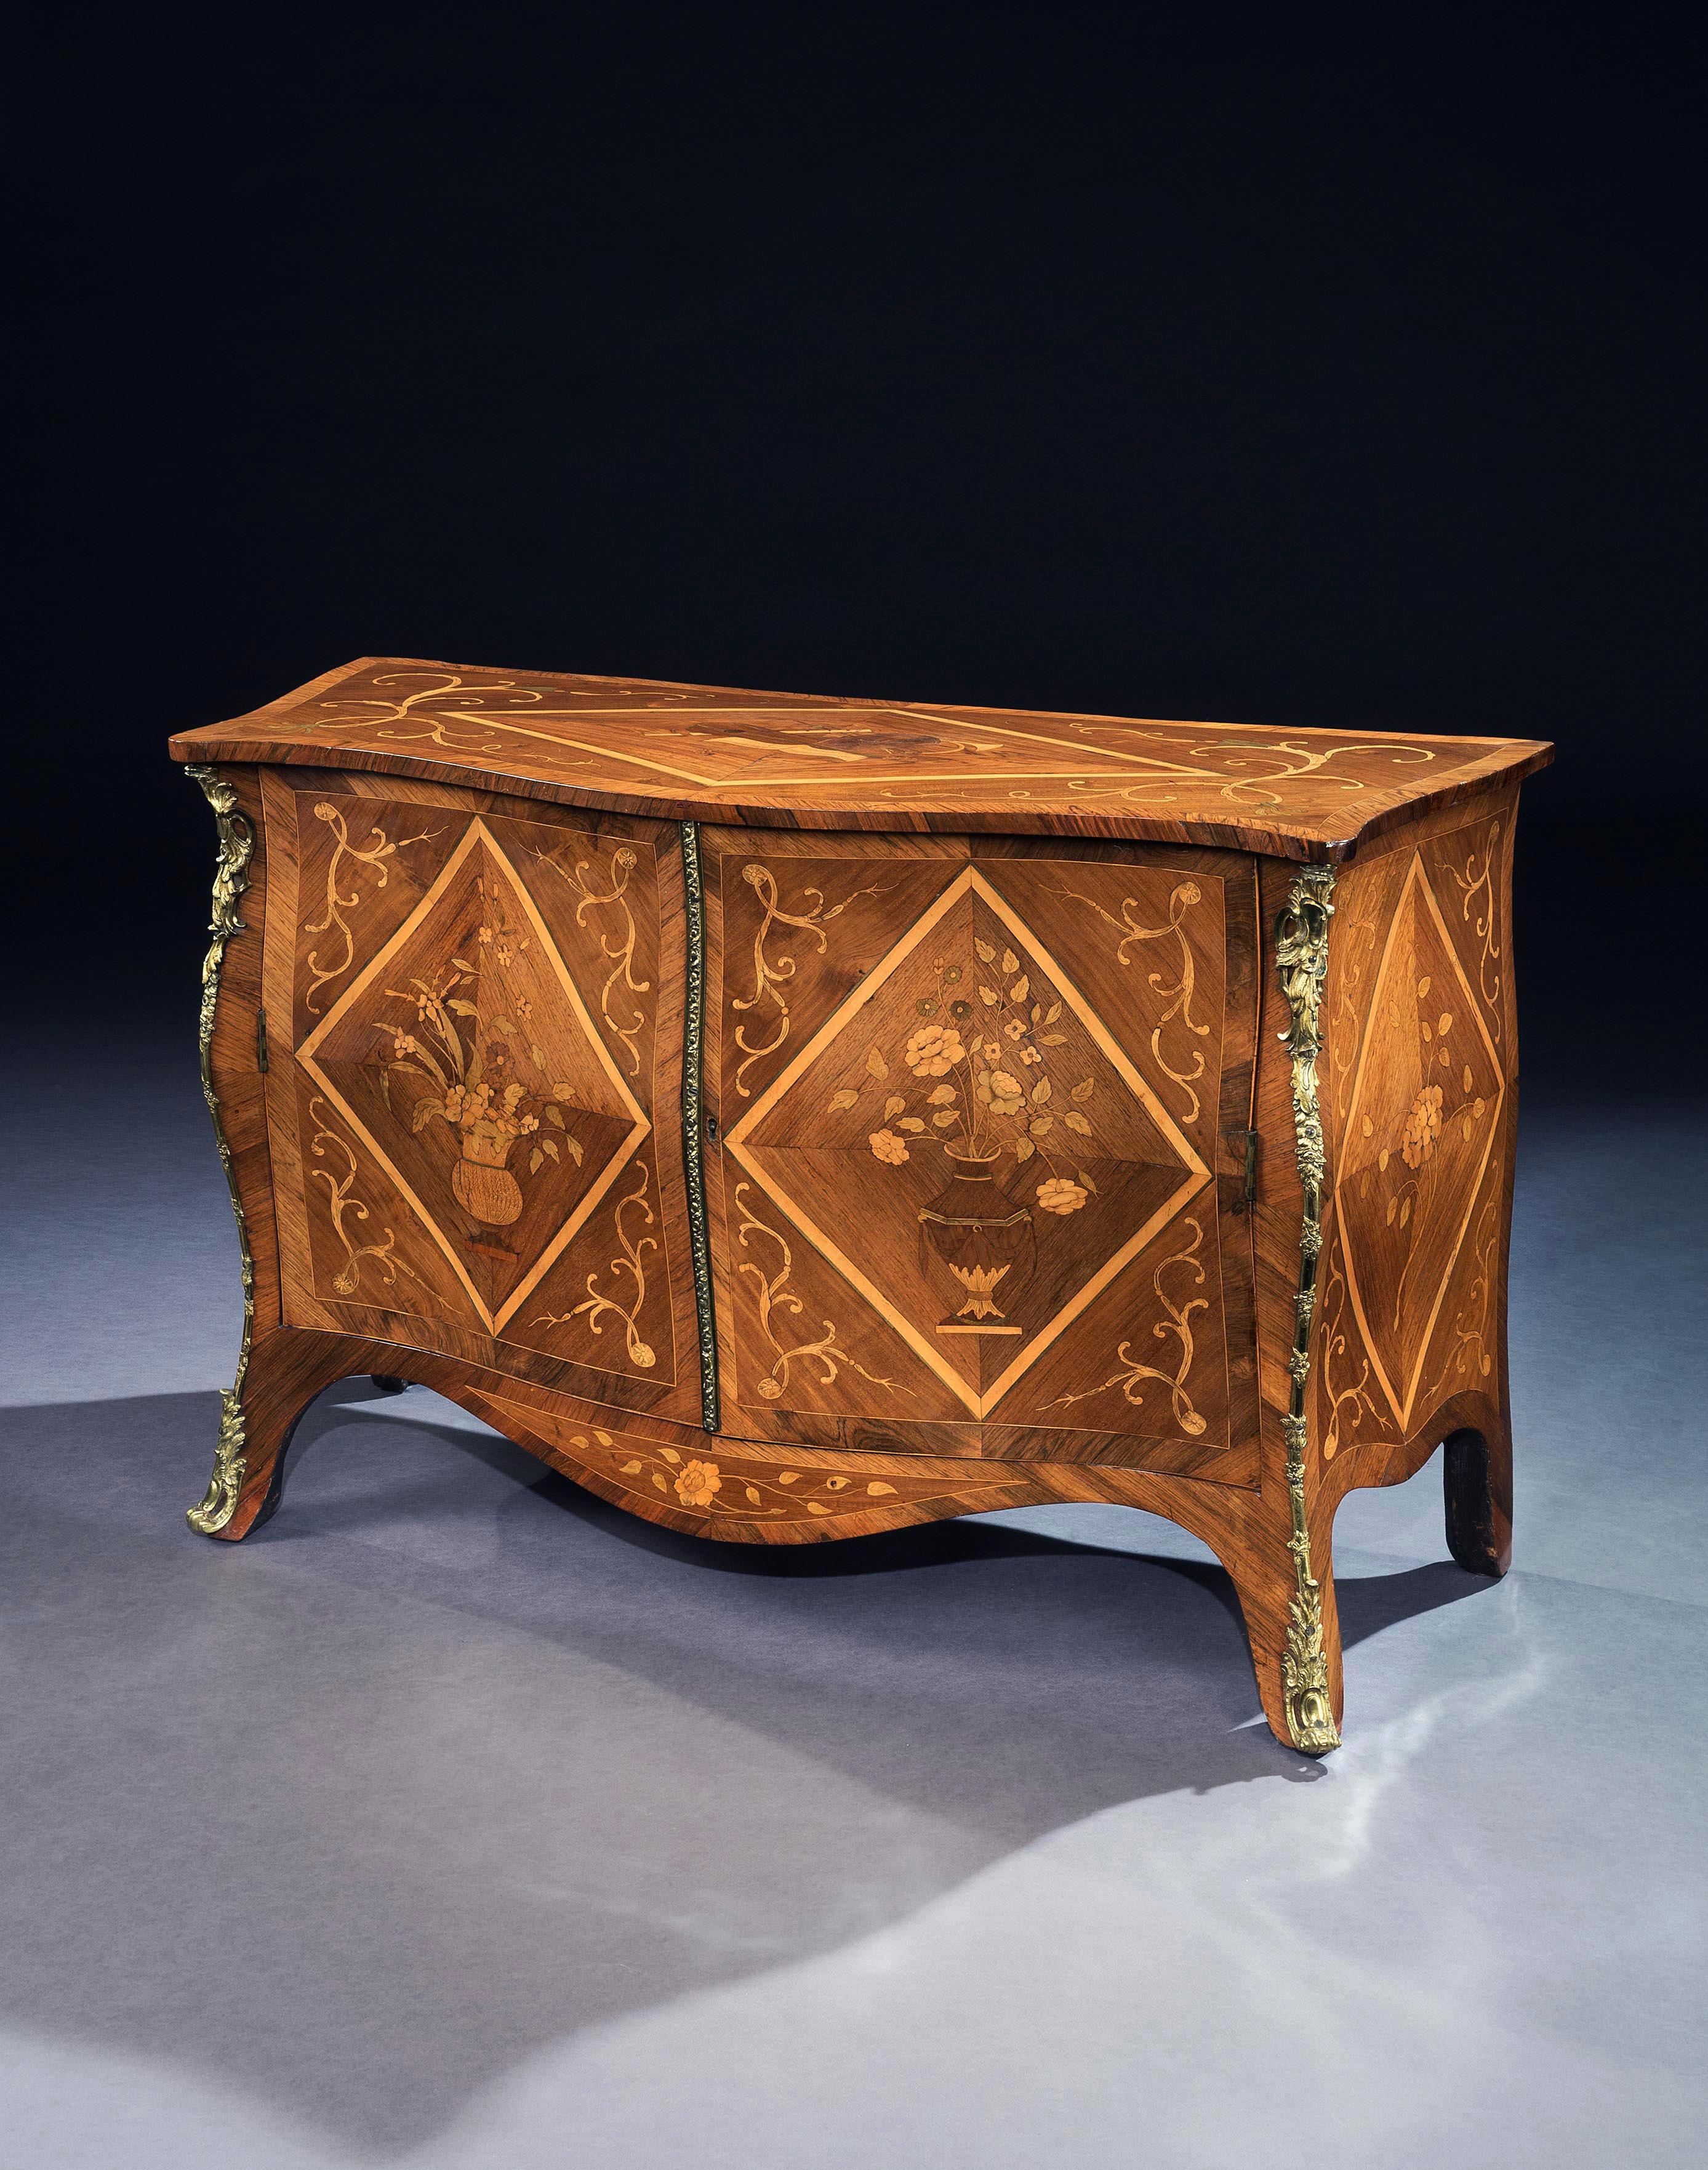 A George III bombé commode veneered in rosewood and hardwood, the cross banded top inlaid with scrolls and a central diamond form enclosing a marquetry panel depicting a musical score and various musical instruments.
The lower part with a pair of